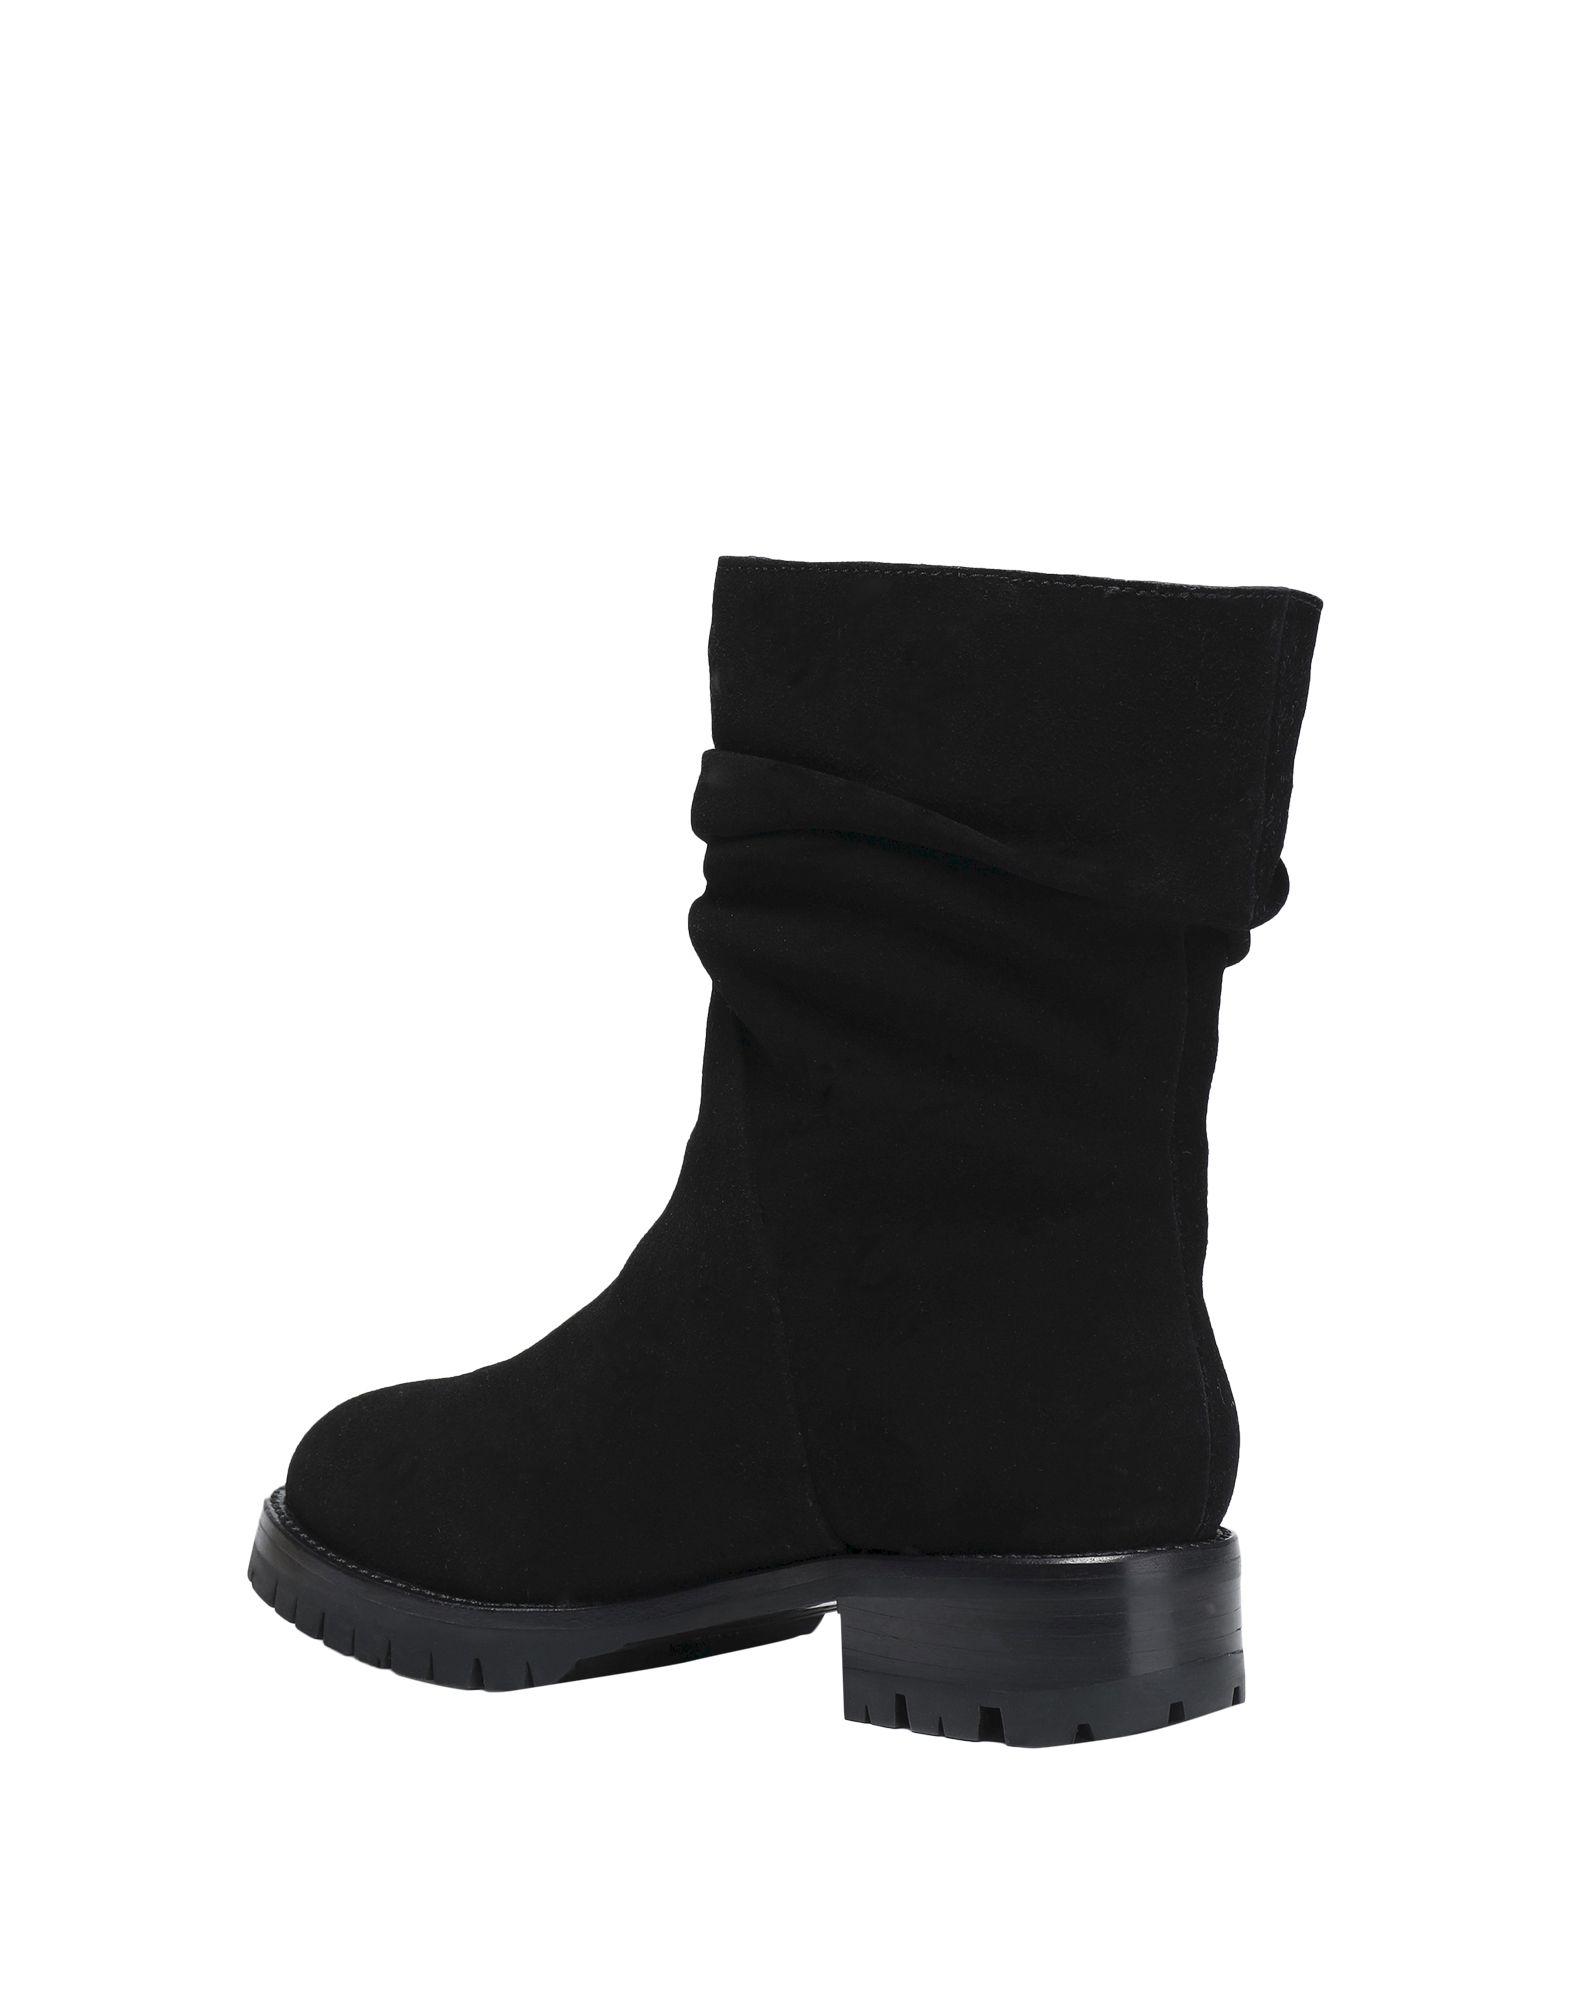 DKNY Suede Ankle Boots in Black - Lyst